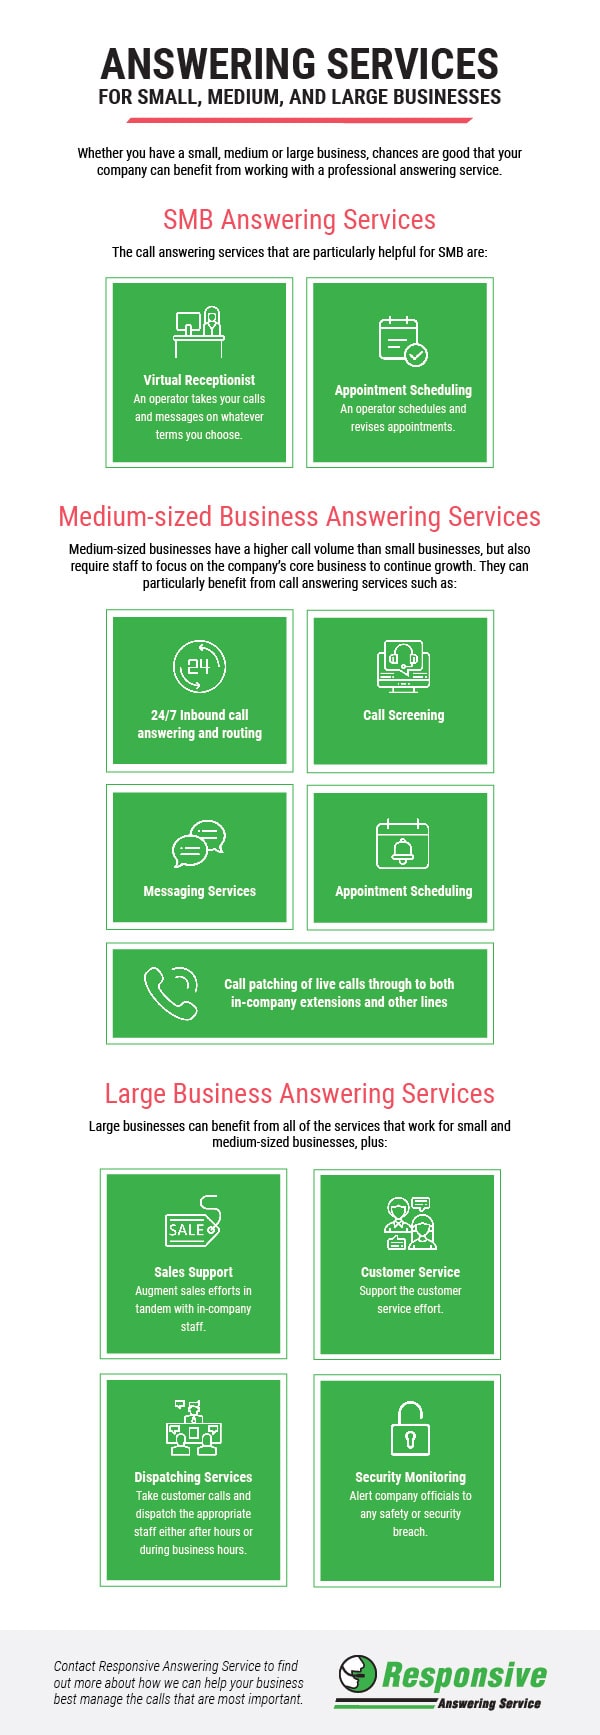 Answering Services for Small, Medium, and Large Businesses